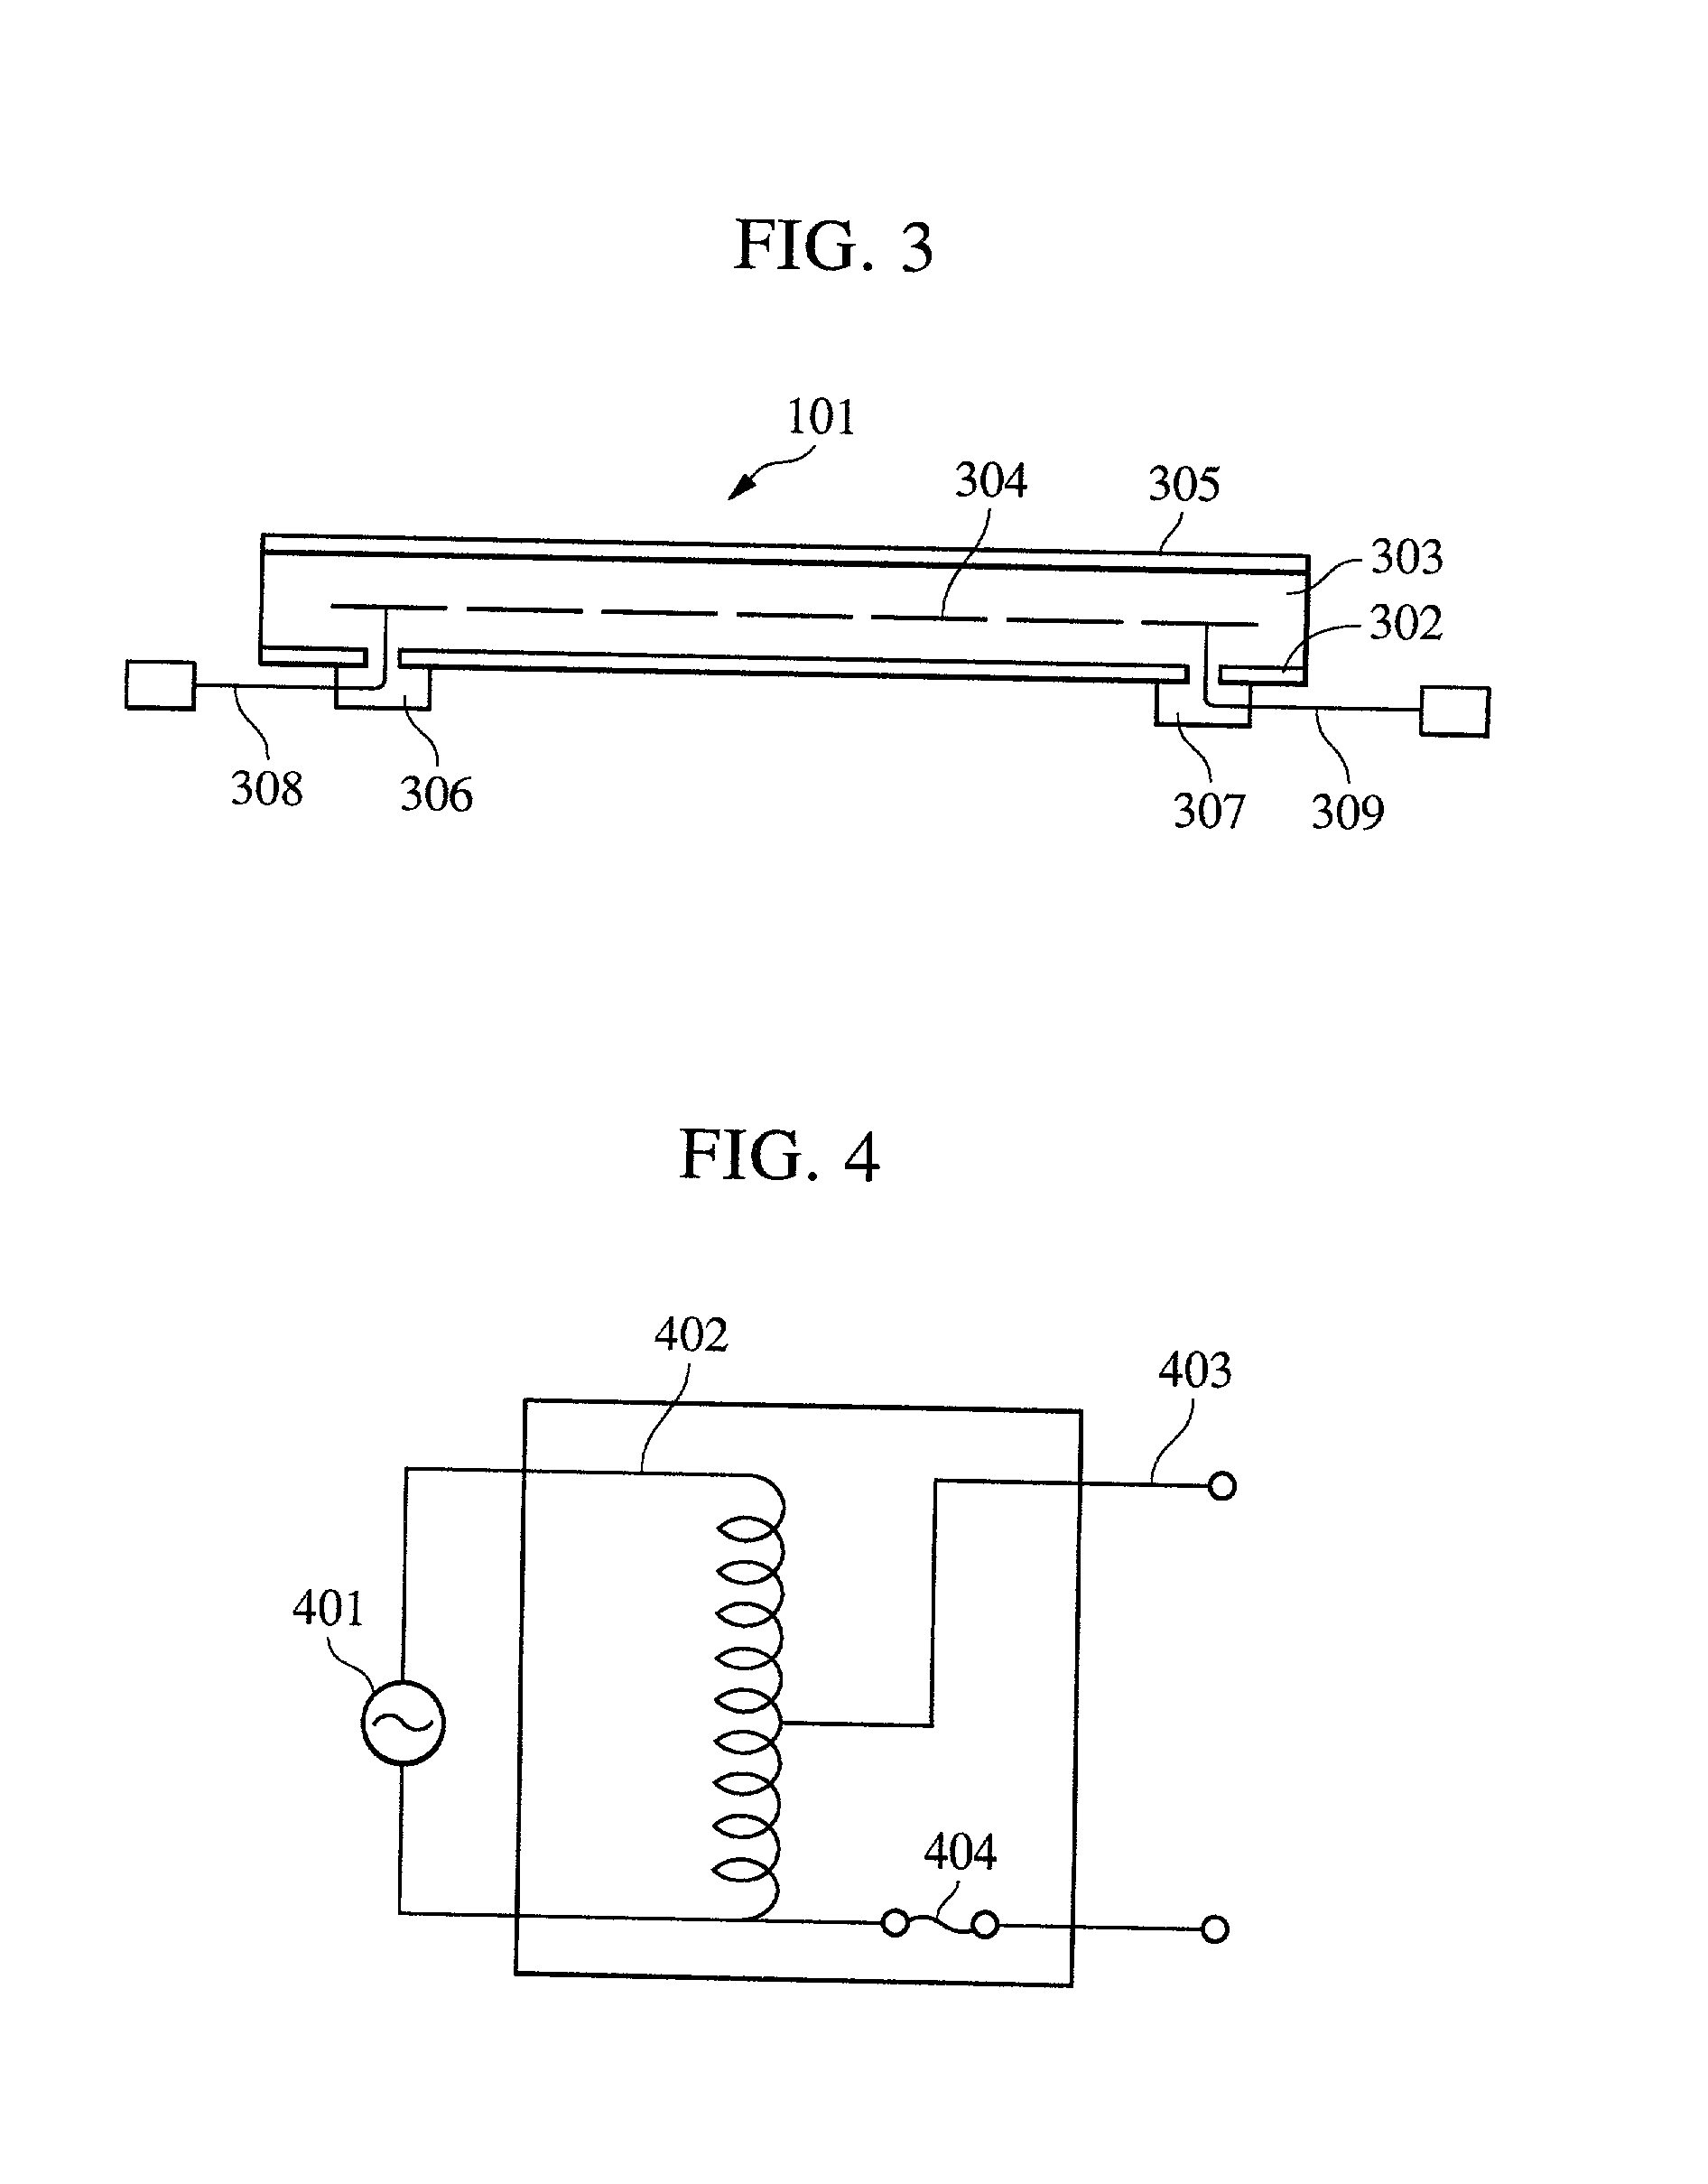 Method and apparatus for testing solar panel, manufacturing method for manufacturing the solar panel, method and apparatus for inspecting solar panel generating system, insulation resistance measuring apparatus, and withstand voltage tester